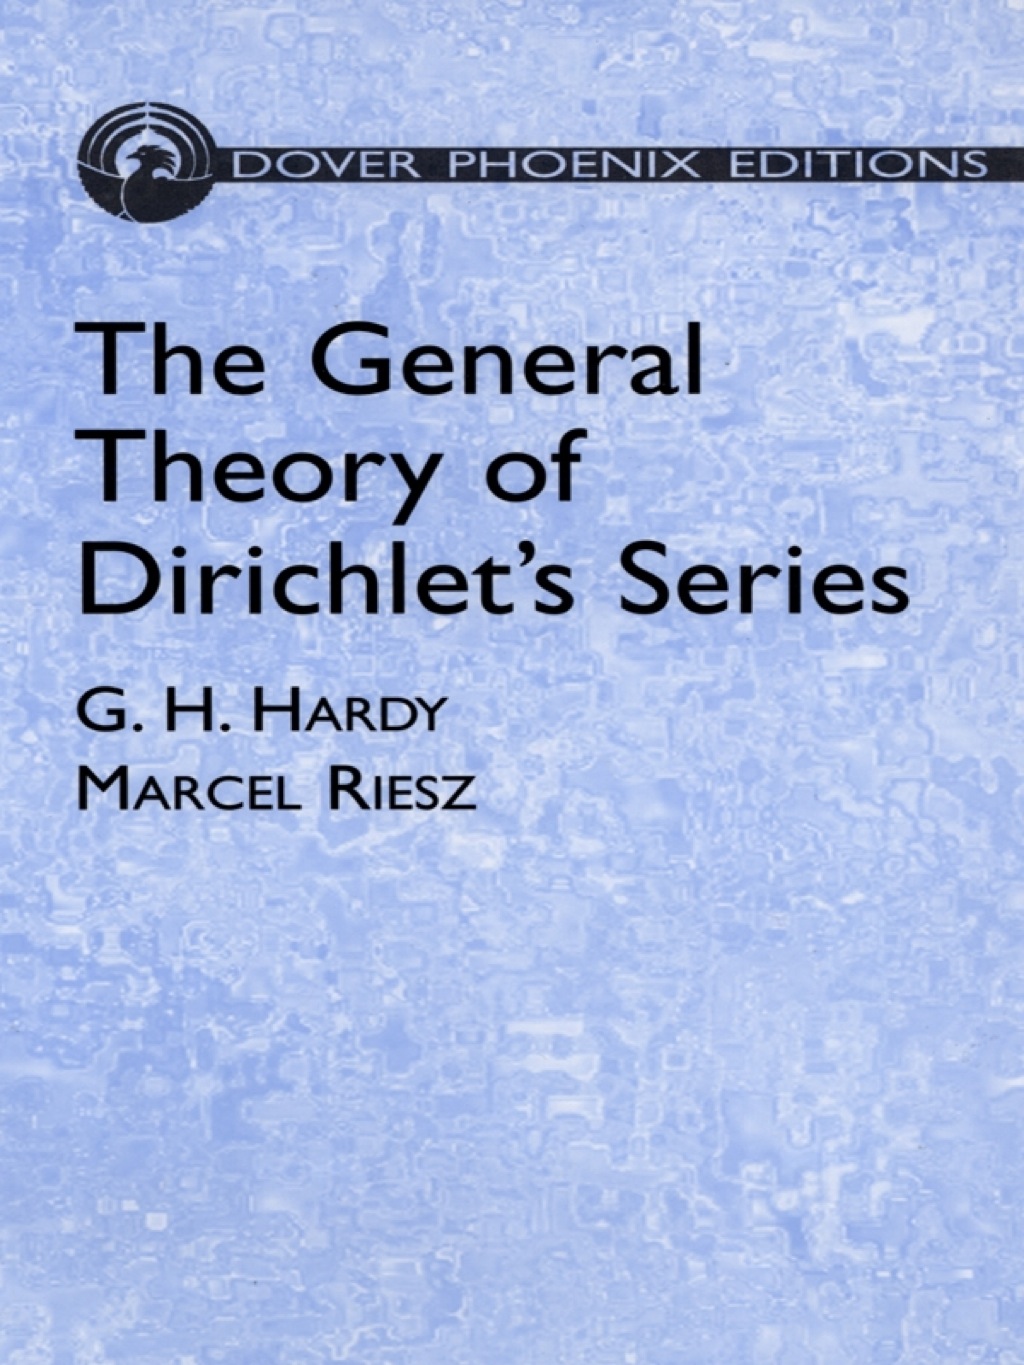 The General Theory of Dirichlet's Series (eBook) - G. H. Hardy,